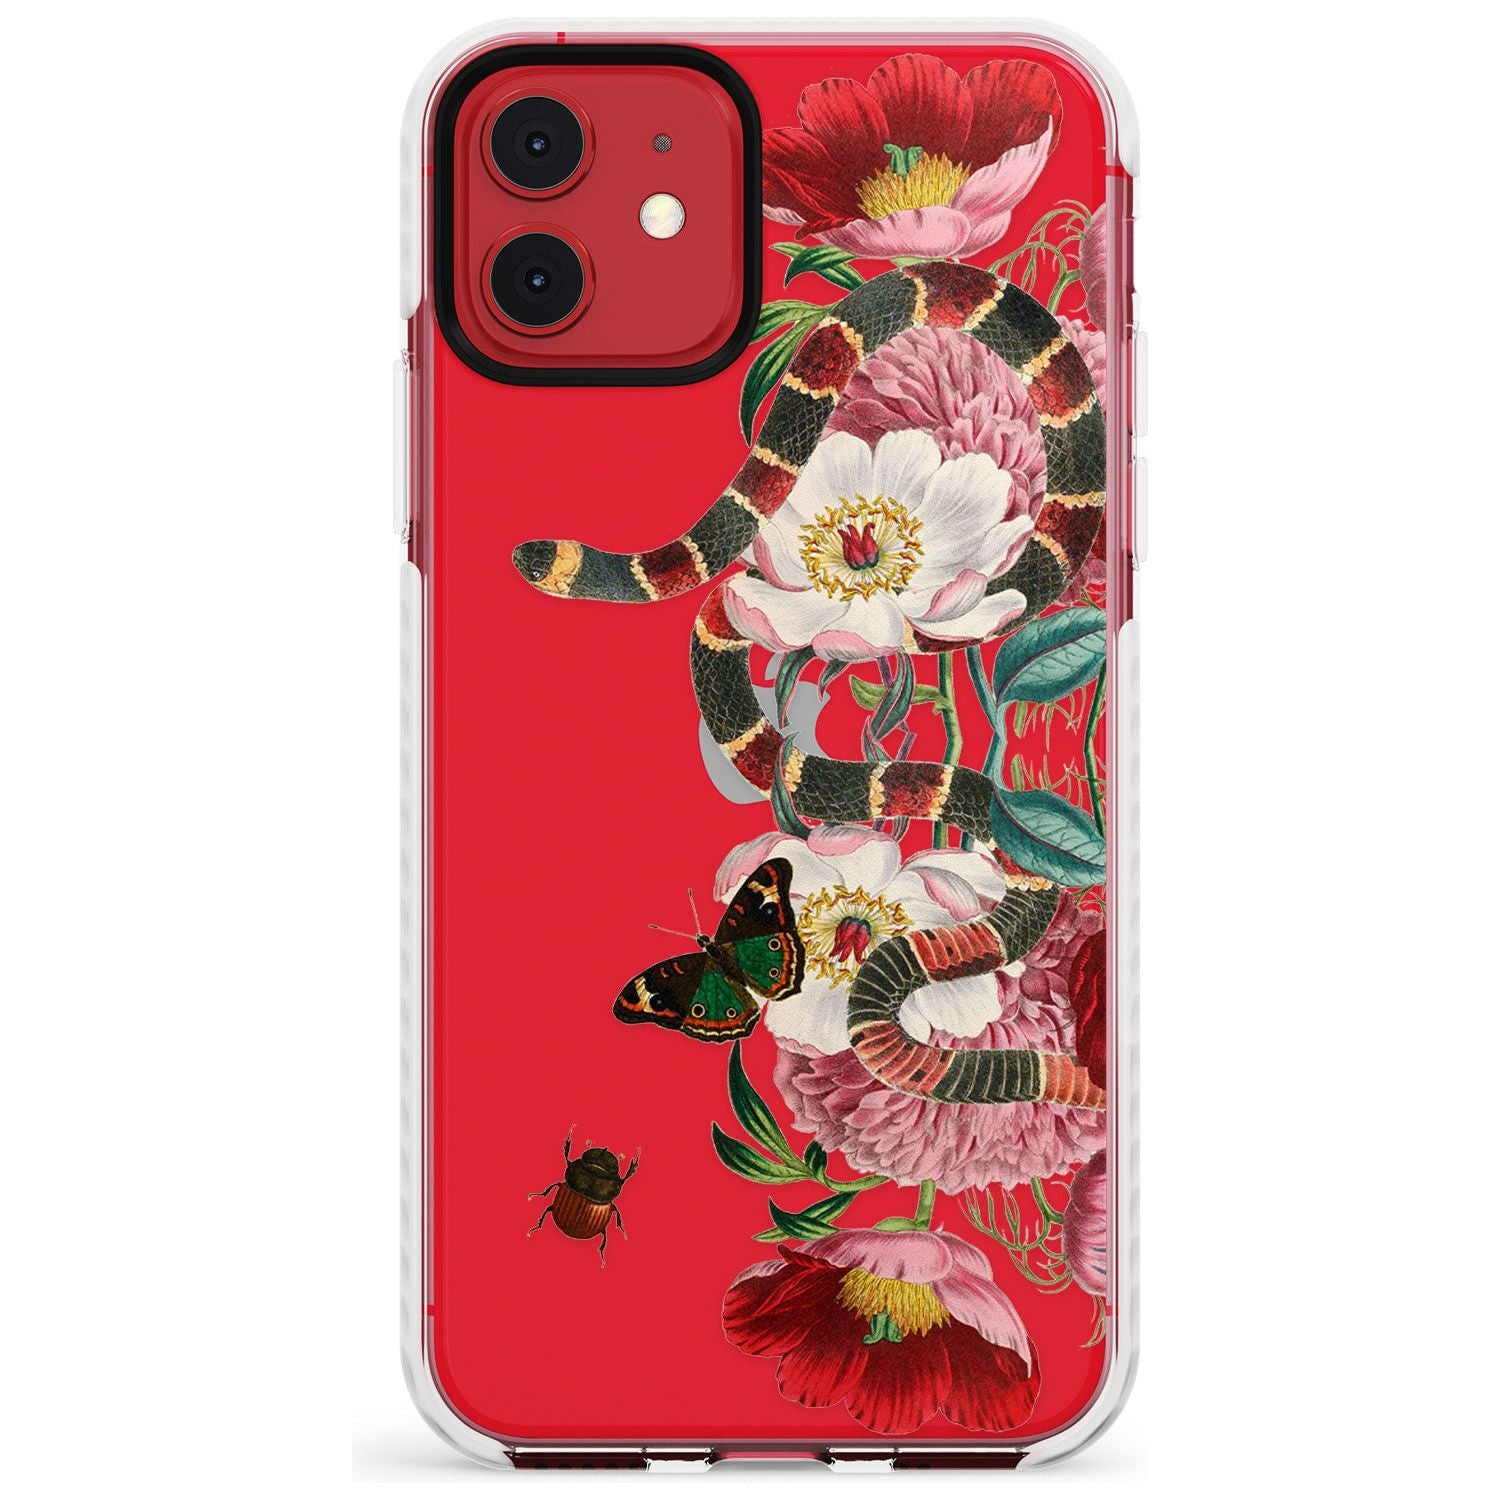 Floral Snake Slim TPU Phone Case for iPhone 11